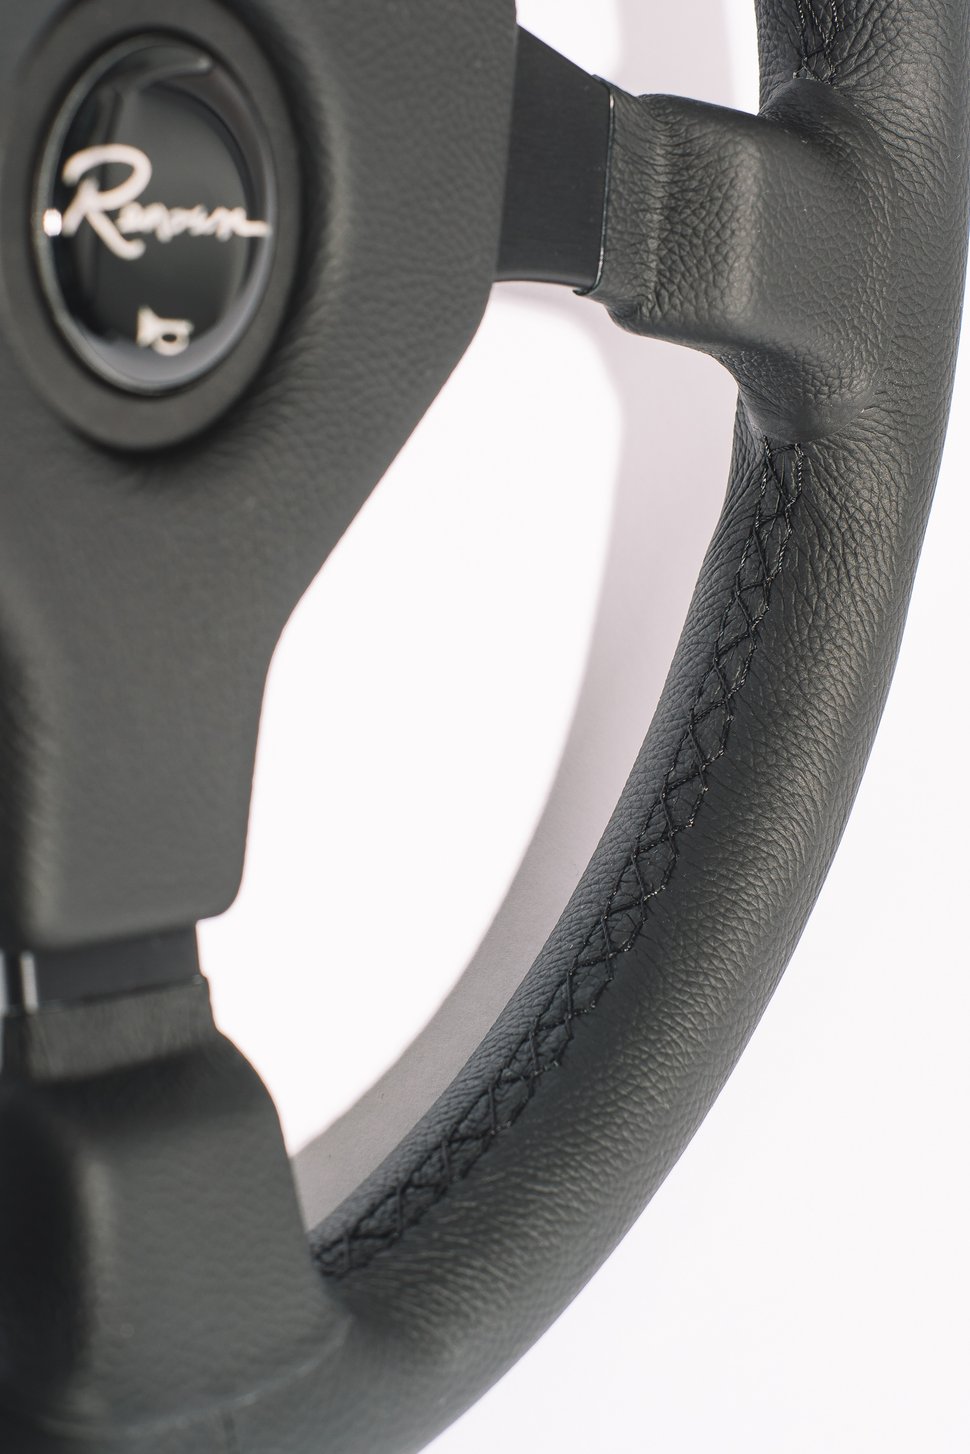 Image of NEW Renown Champion Horn Pad Steering Wheel